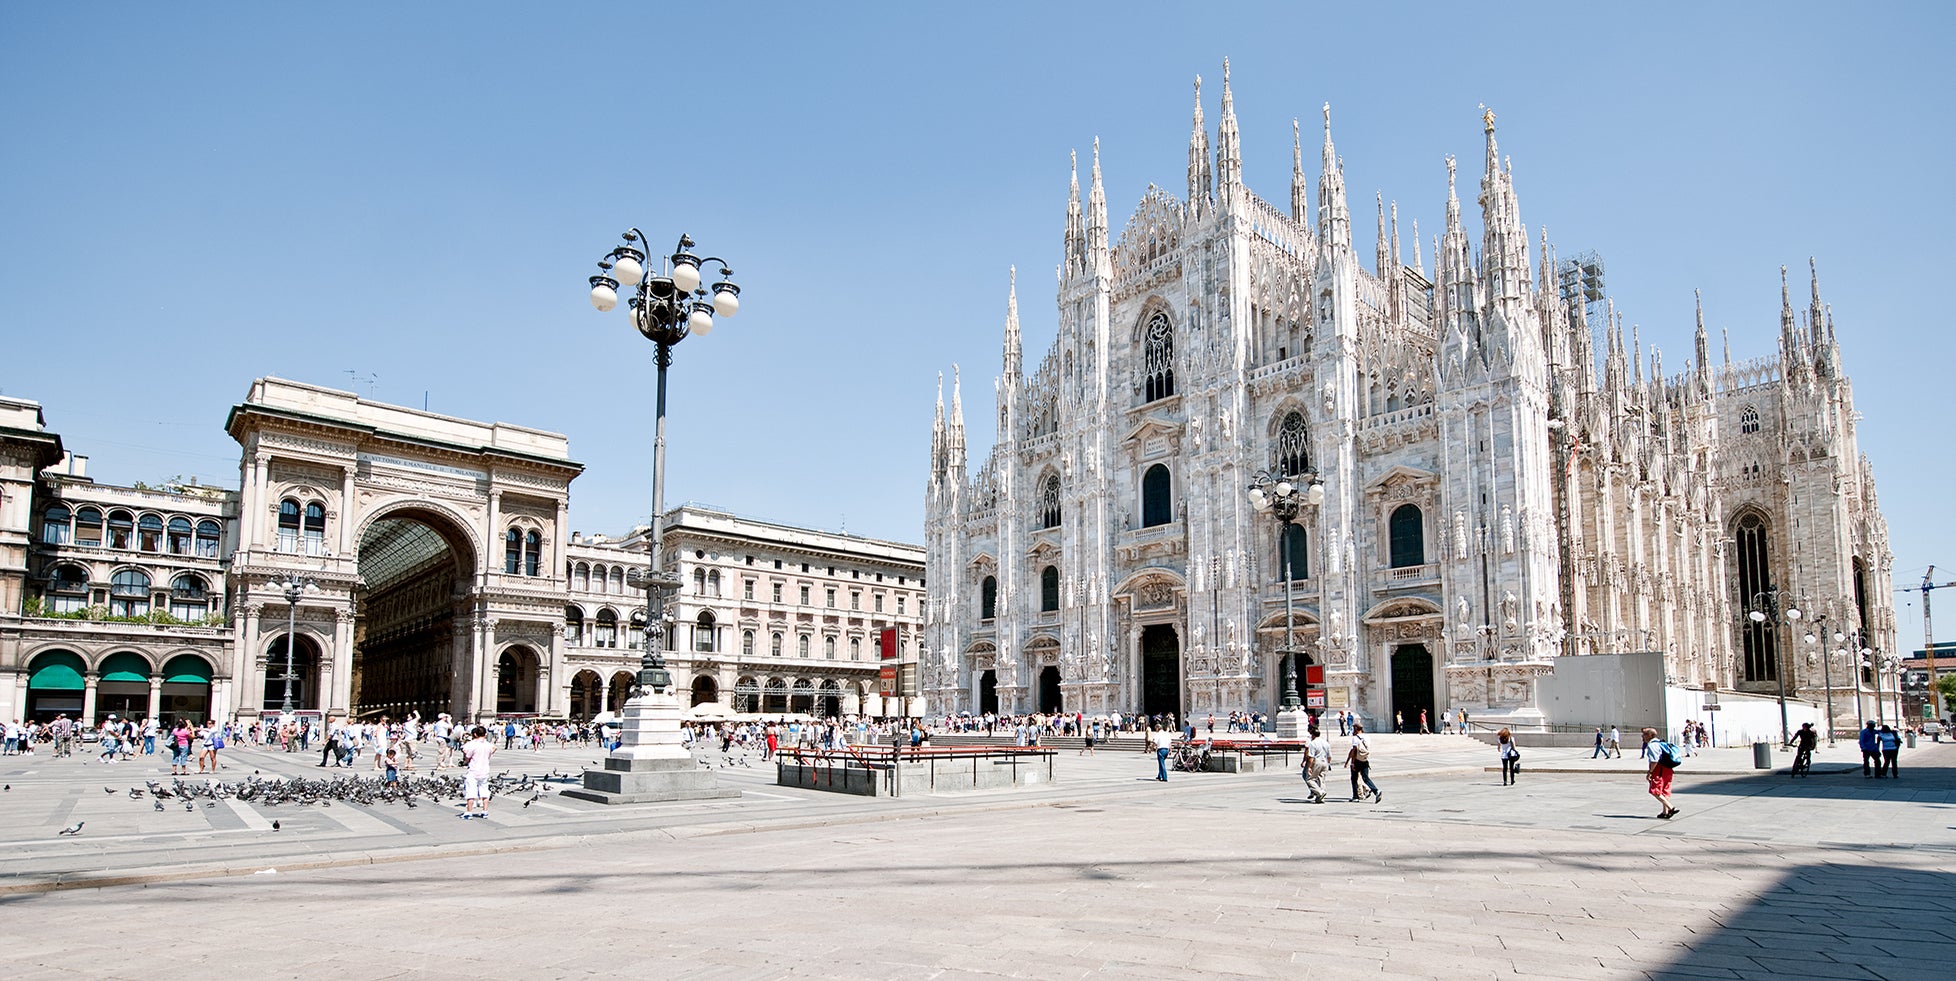 The streets leading up to Milan’s Piazza del Duomo have been protected